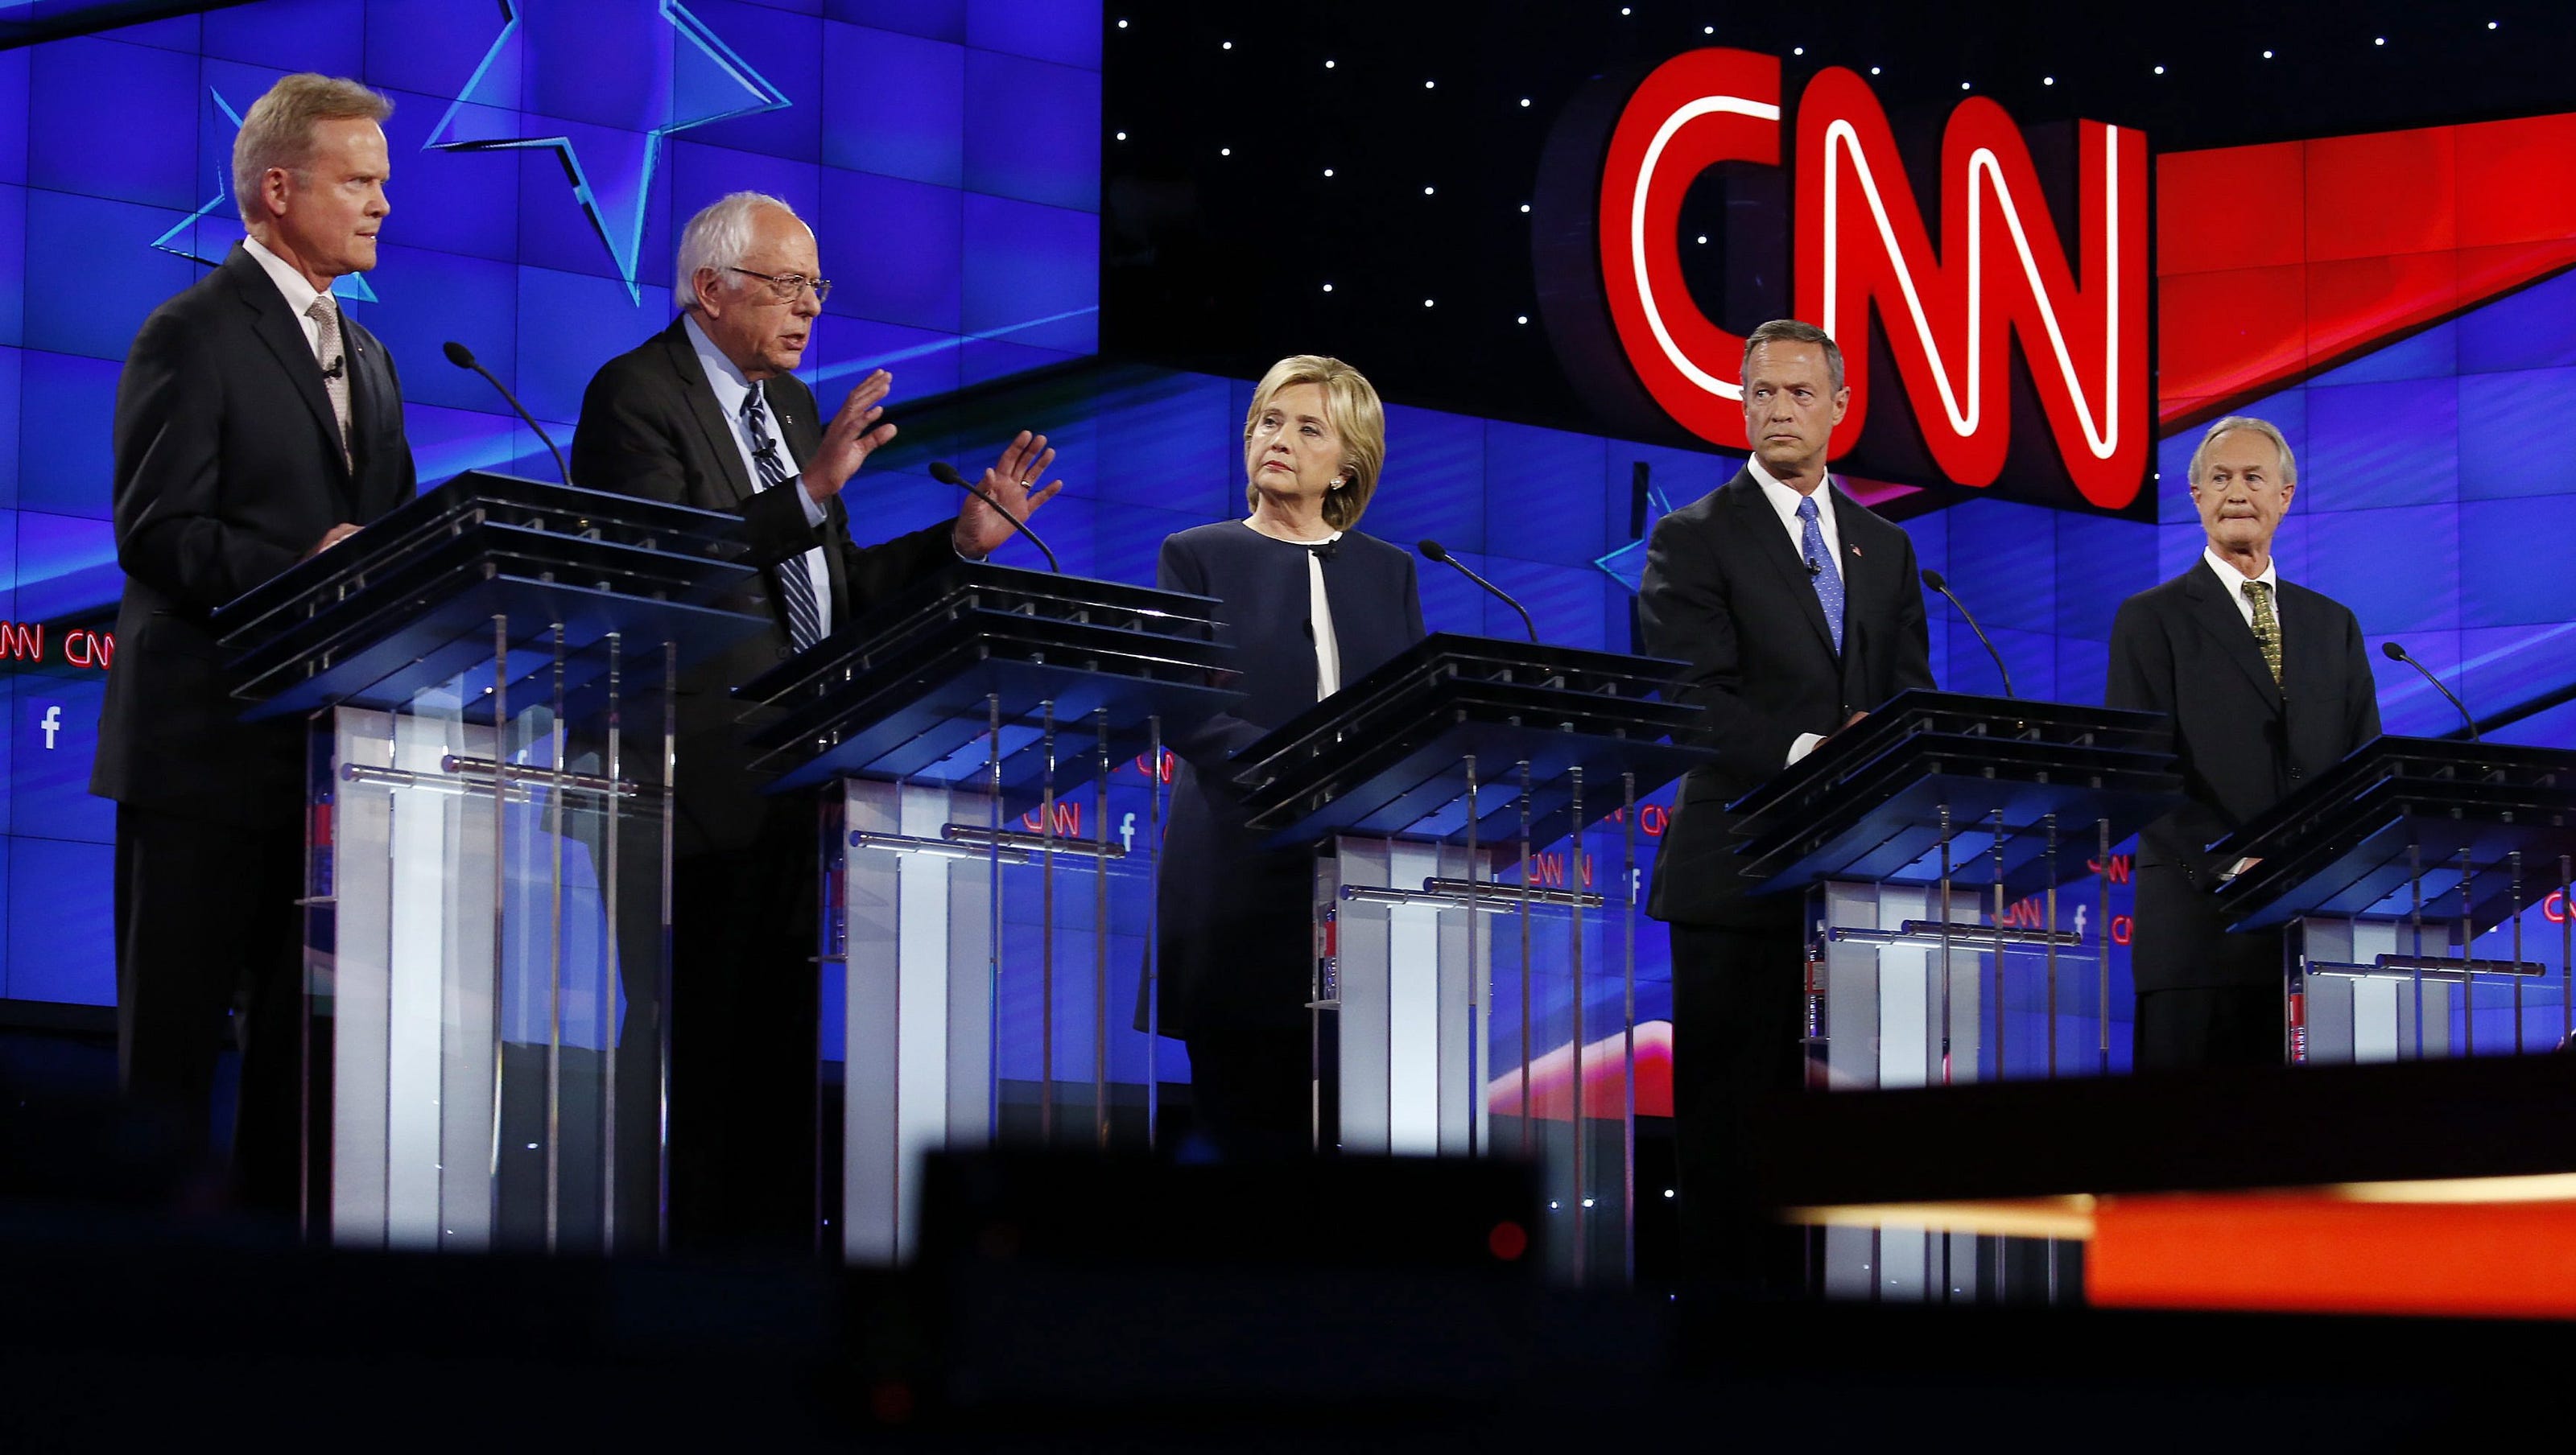 5-takeaways-from-the-last-democratic-debate-before-the-iowa-caucuses